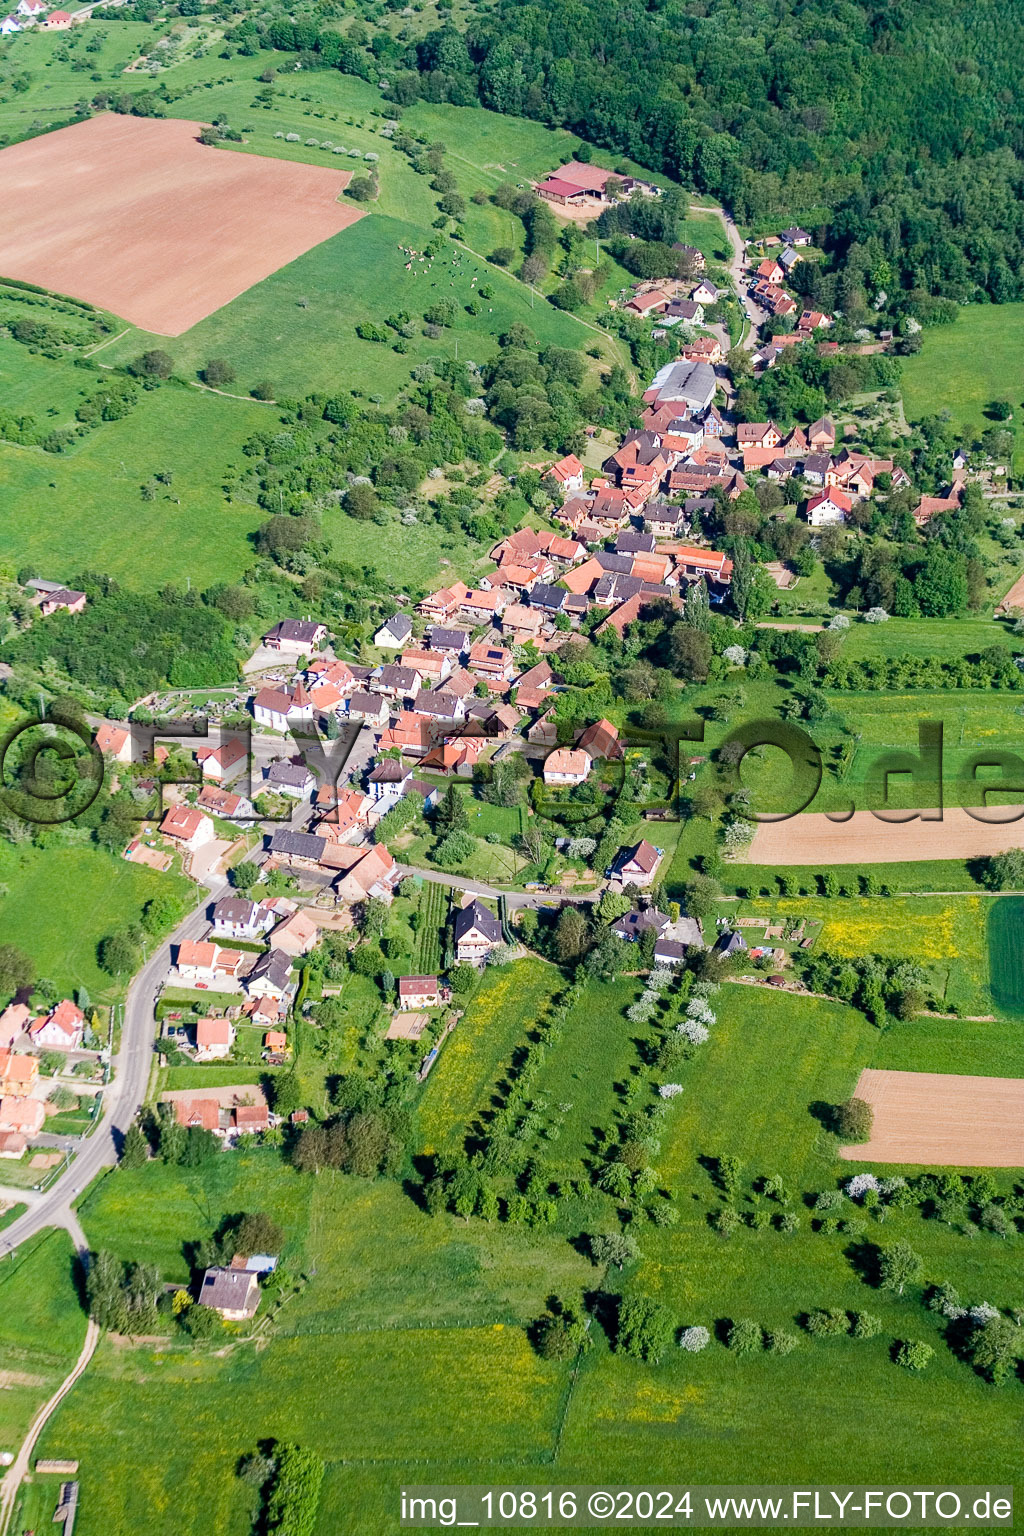 Village - view on the edge of agricultural fields and farmland in the district Mitschdorf in GA?rsdorf in Grand Est, France